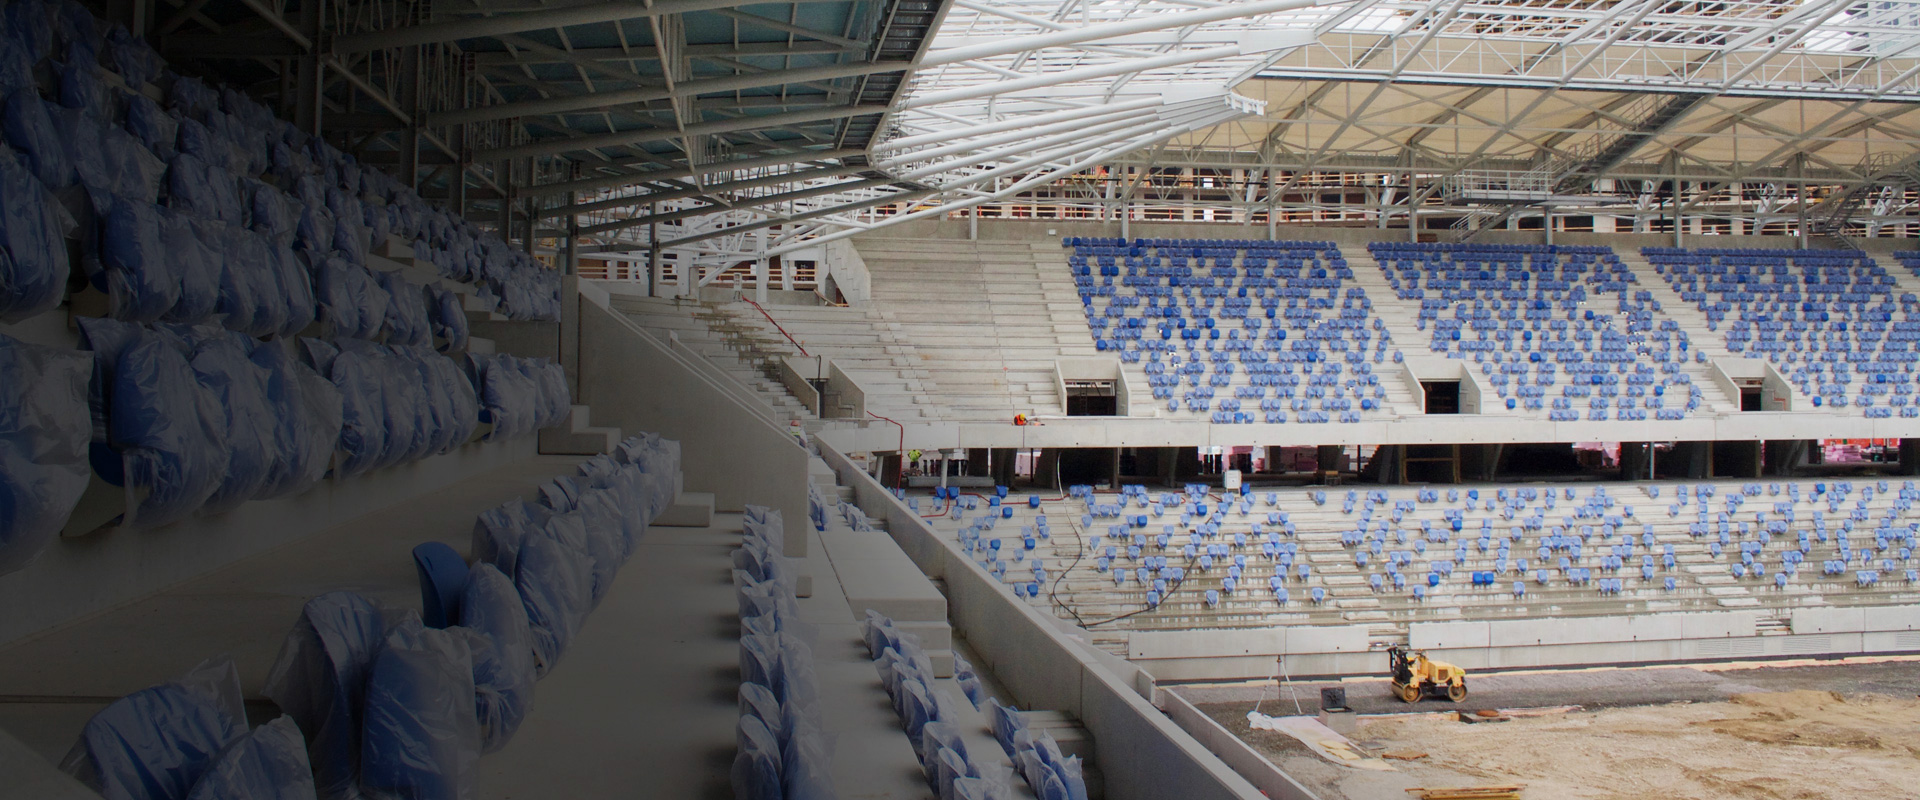 The new national arena in Bratislava is set to be awarded the highest UEFA stadium category.